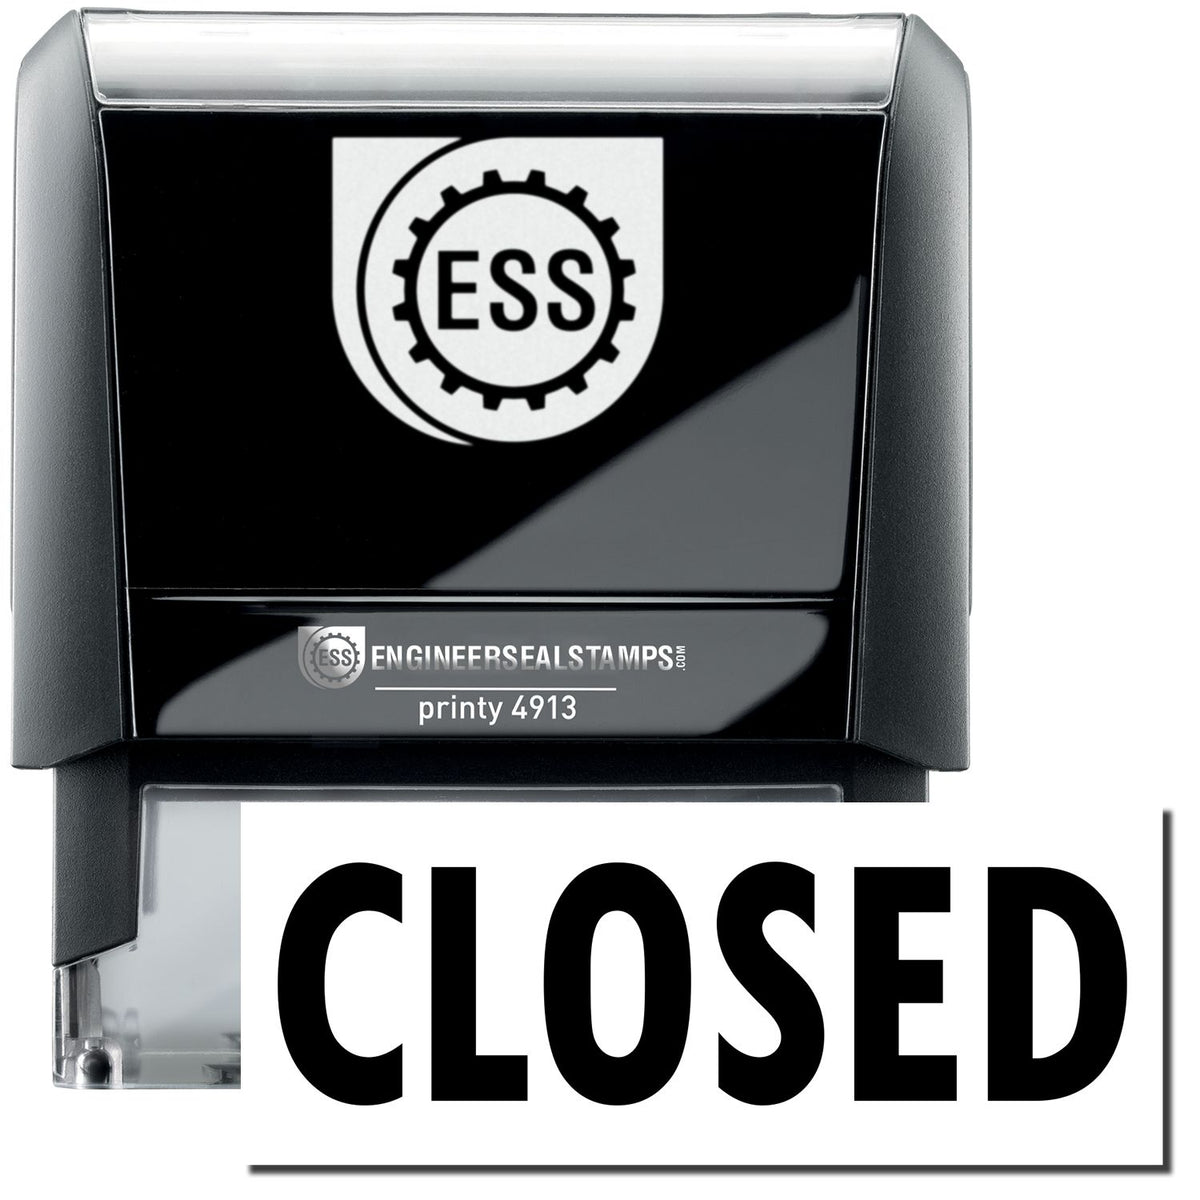 A large self-inking stamp with a stamped image showing how the text &quot;CLOSED&quot; in a large bold font is displayed by it.